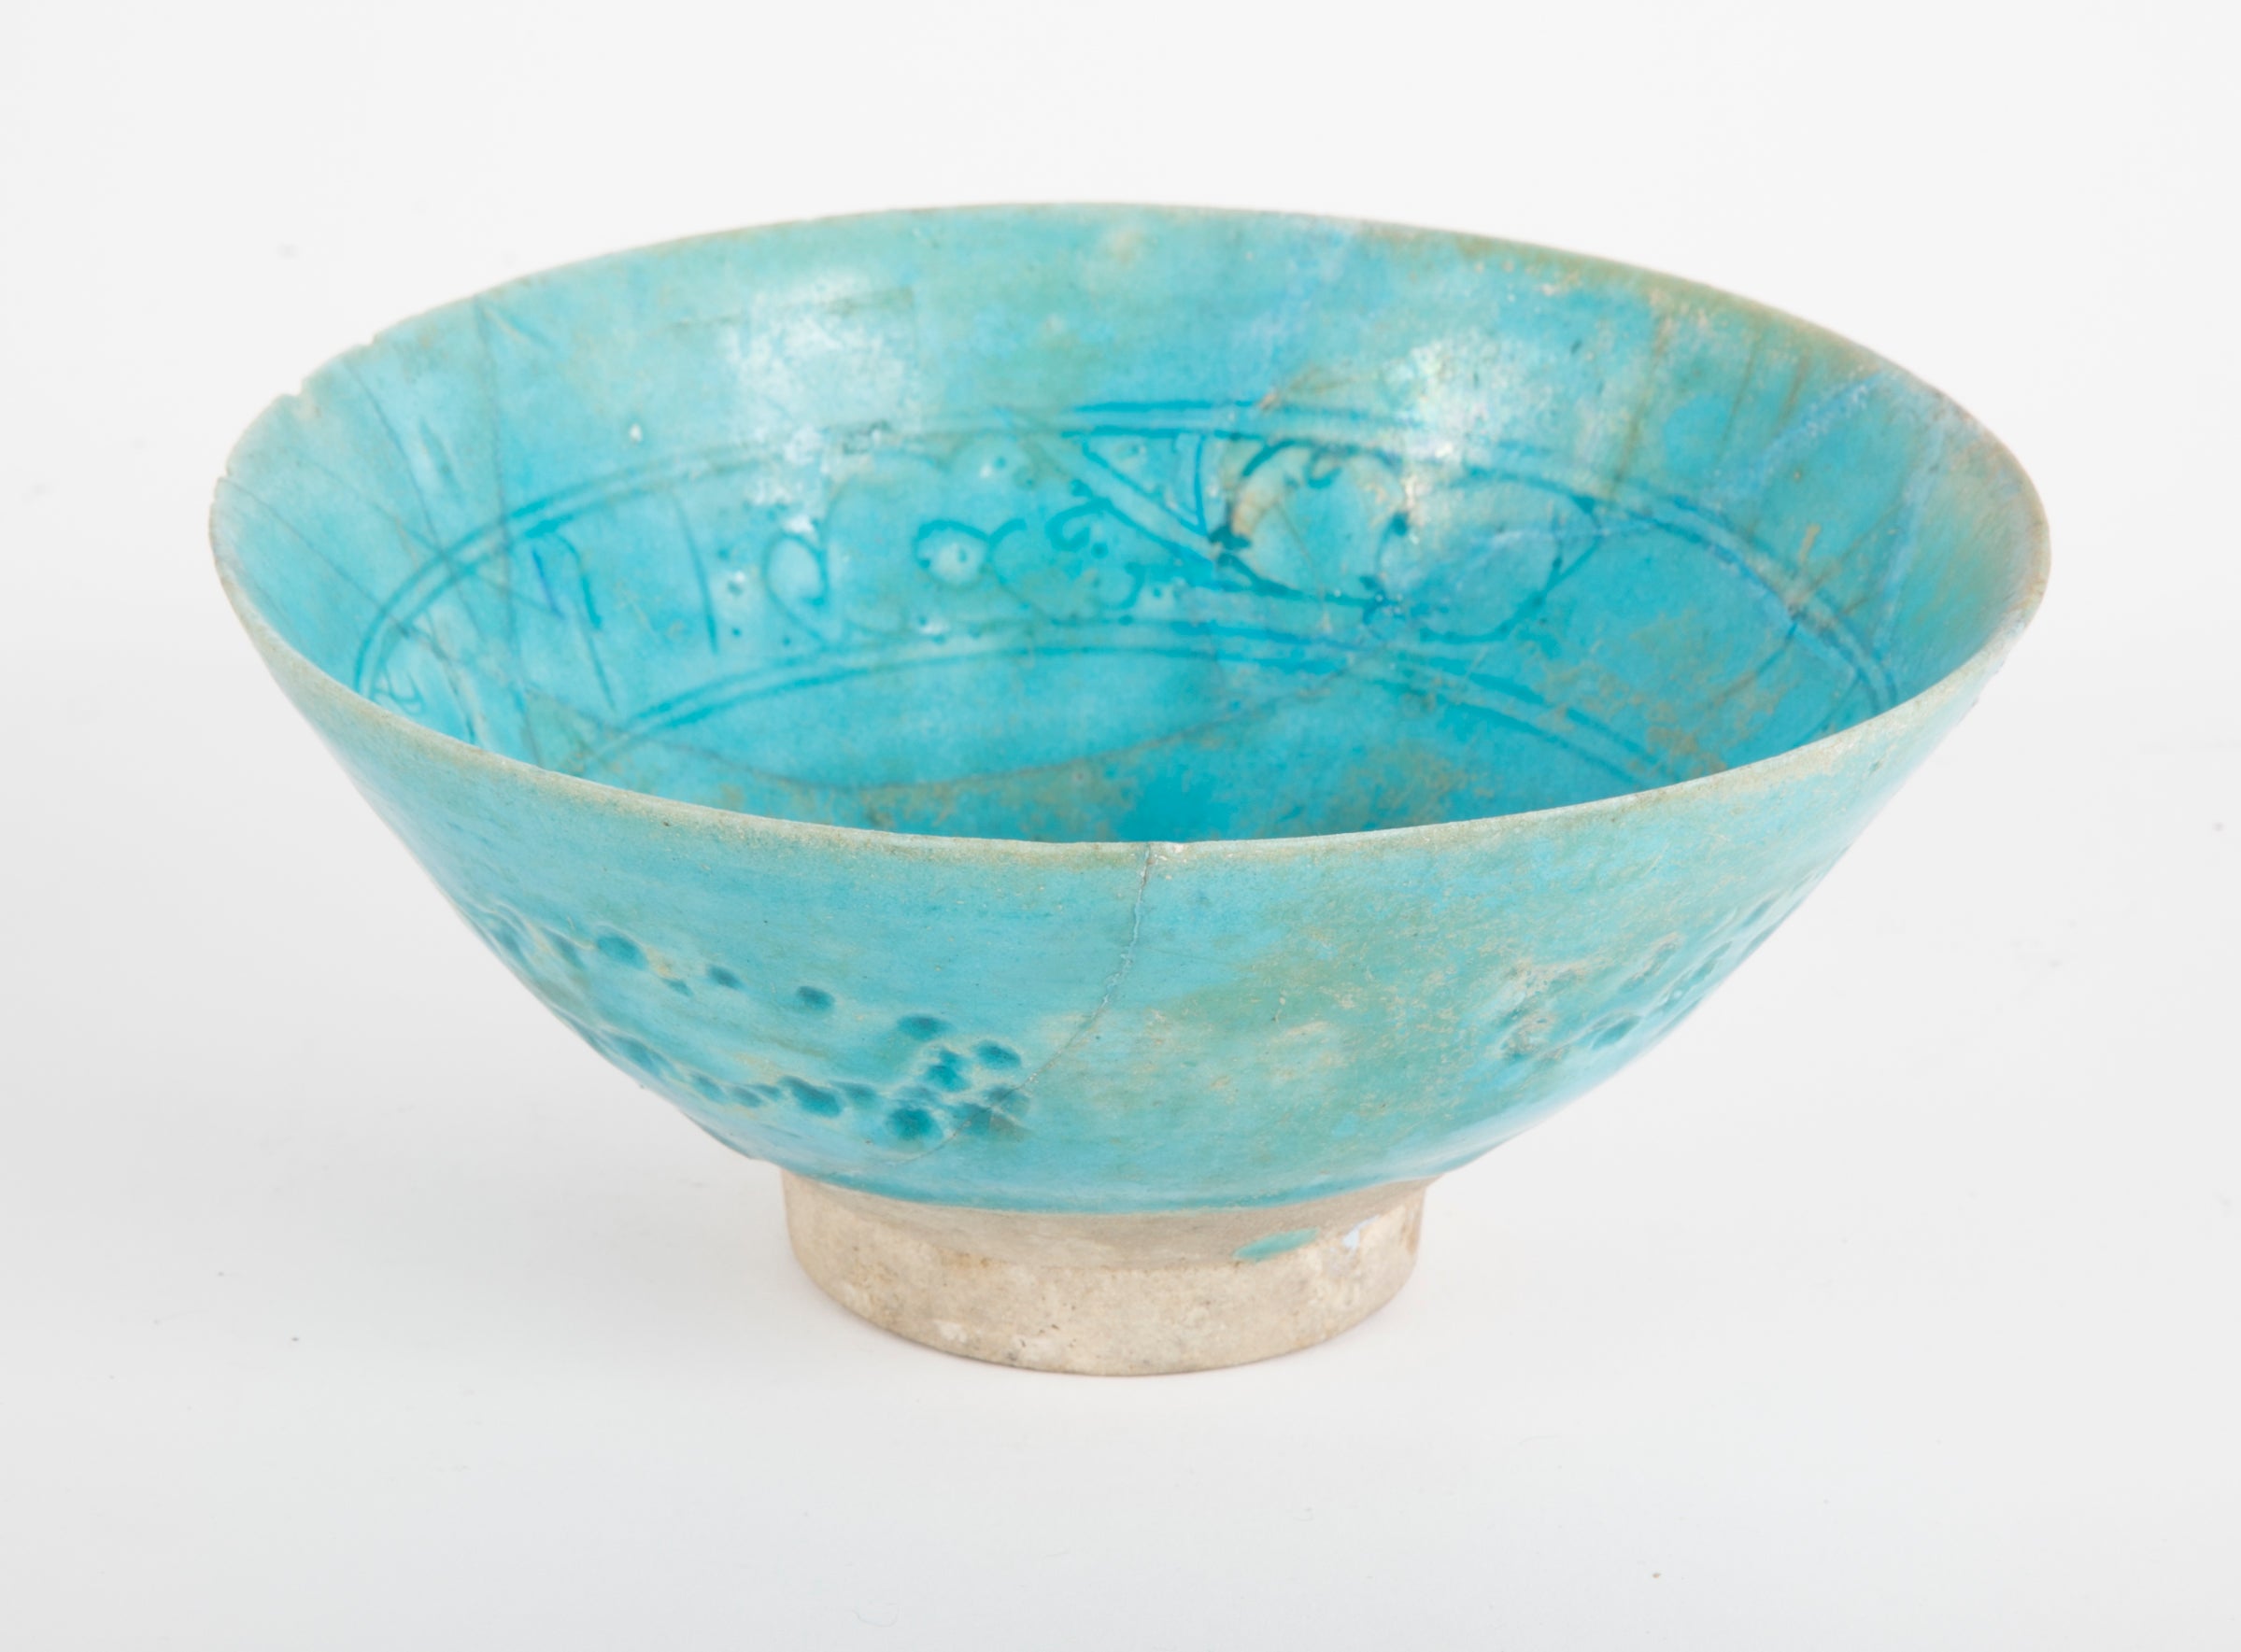 Footed Conical Form Kashan Turquoise Glazed Pottery Bowl